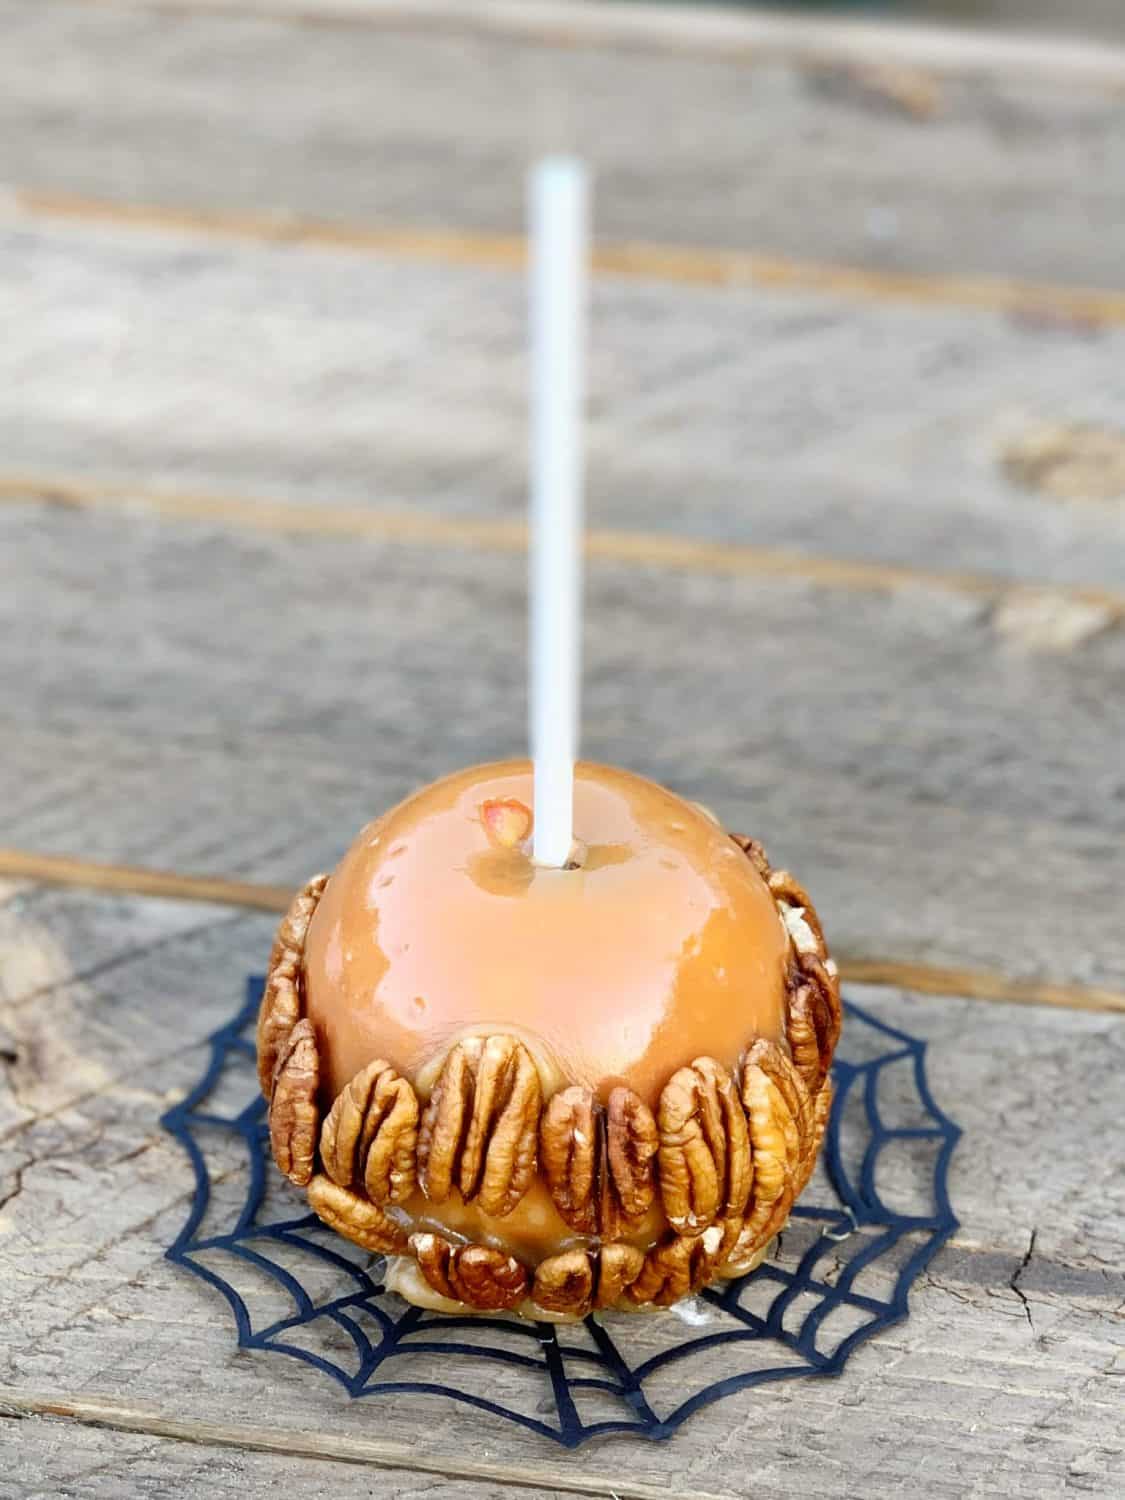 homemade caramel apple with pecans